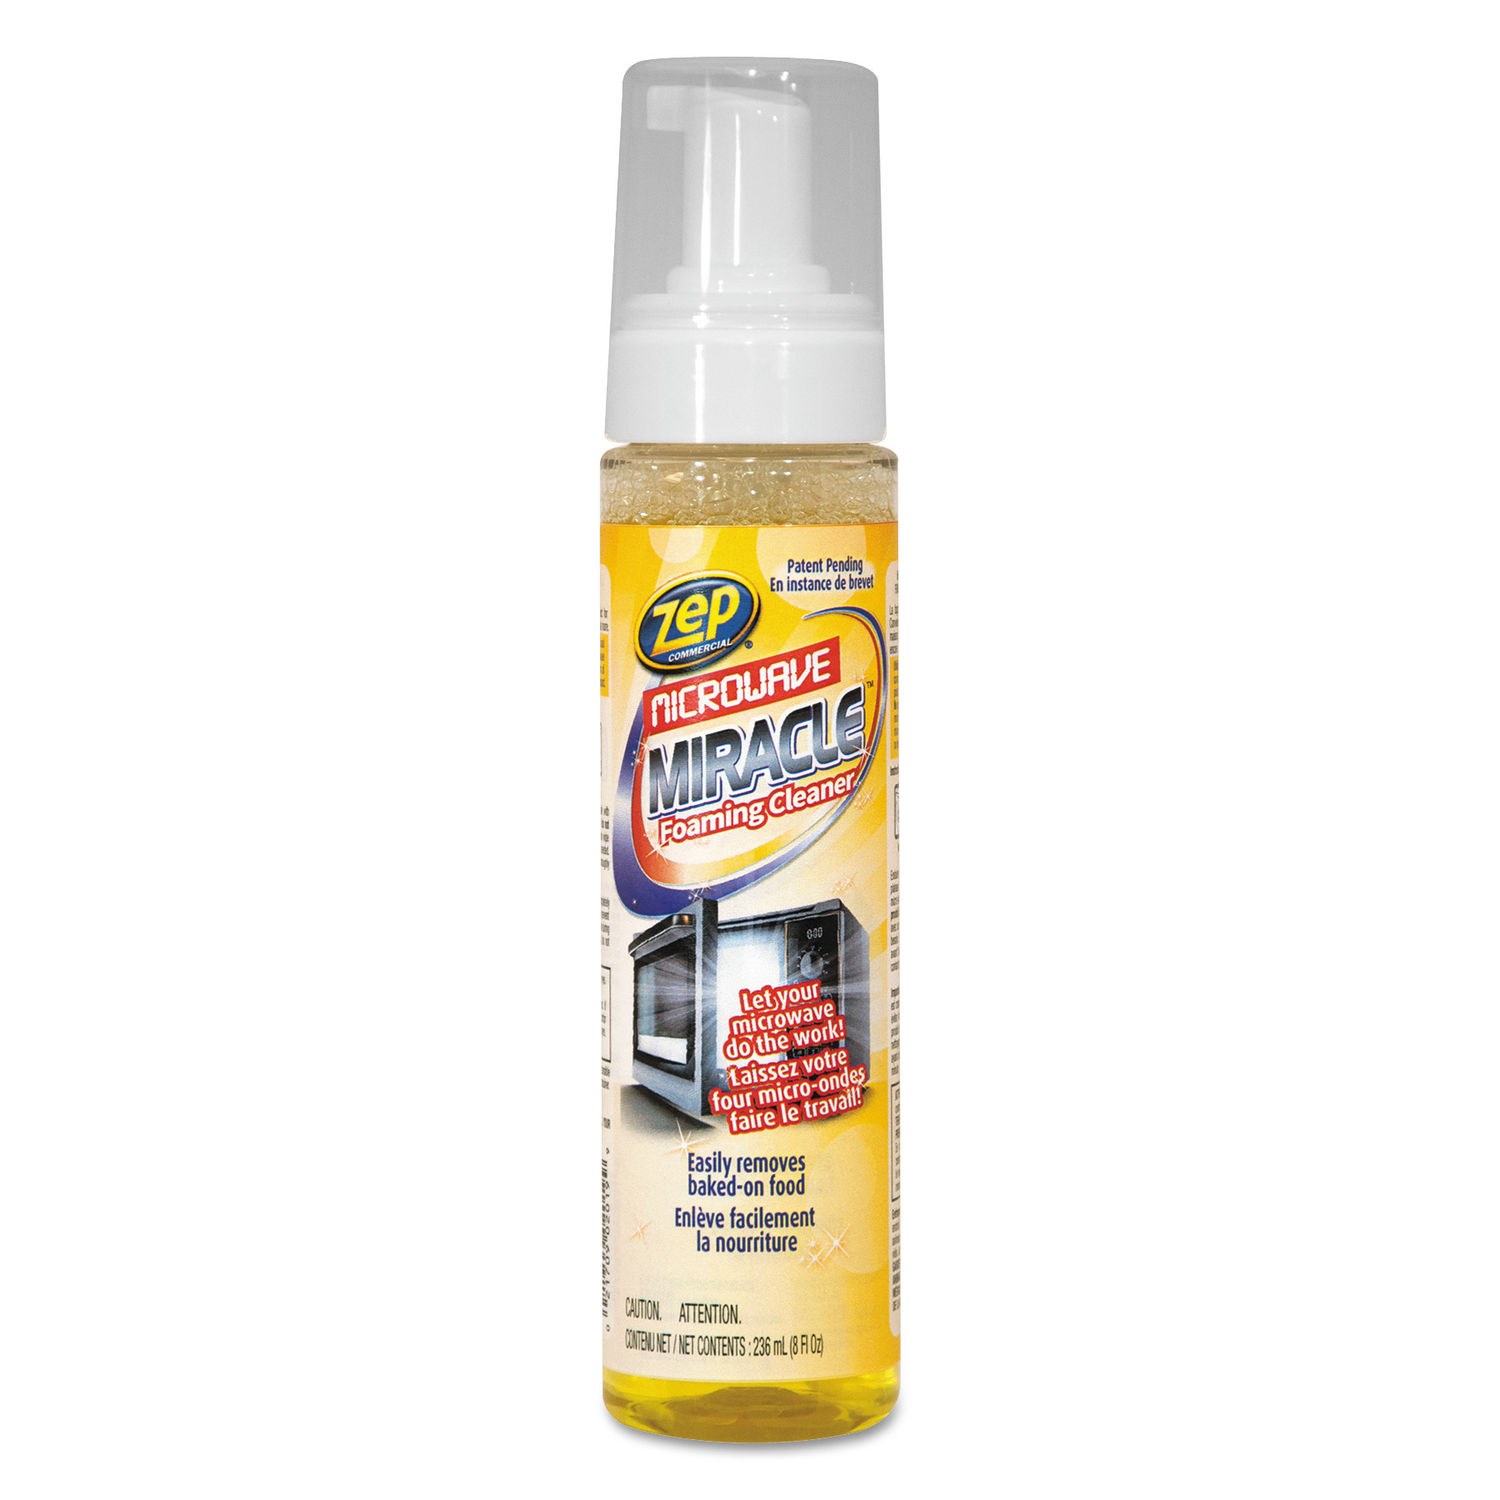 Microwave Oven Cleaner Lemon Scented Spray Foam. Removes Food and Grease